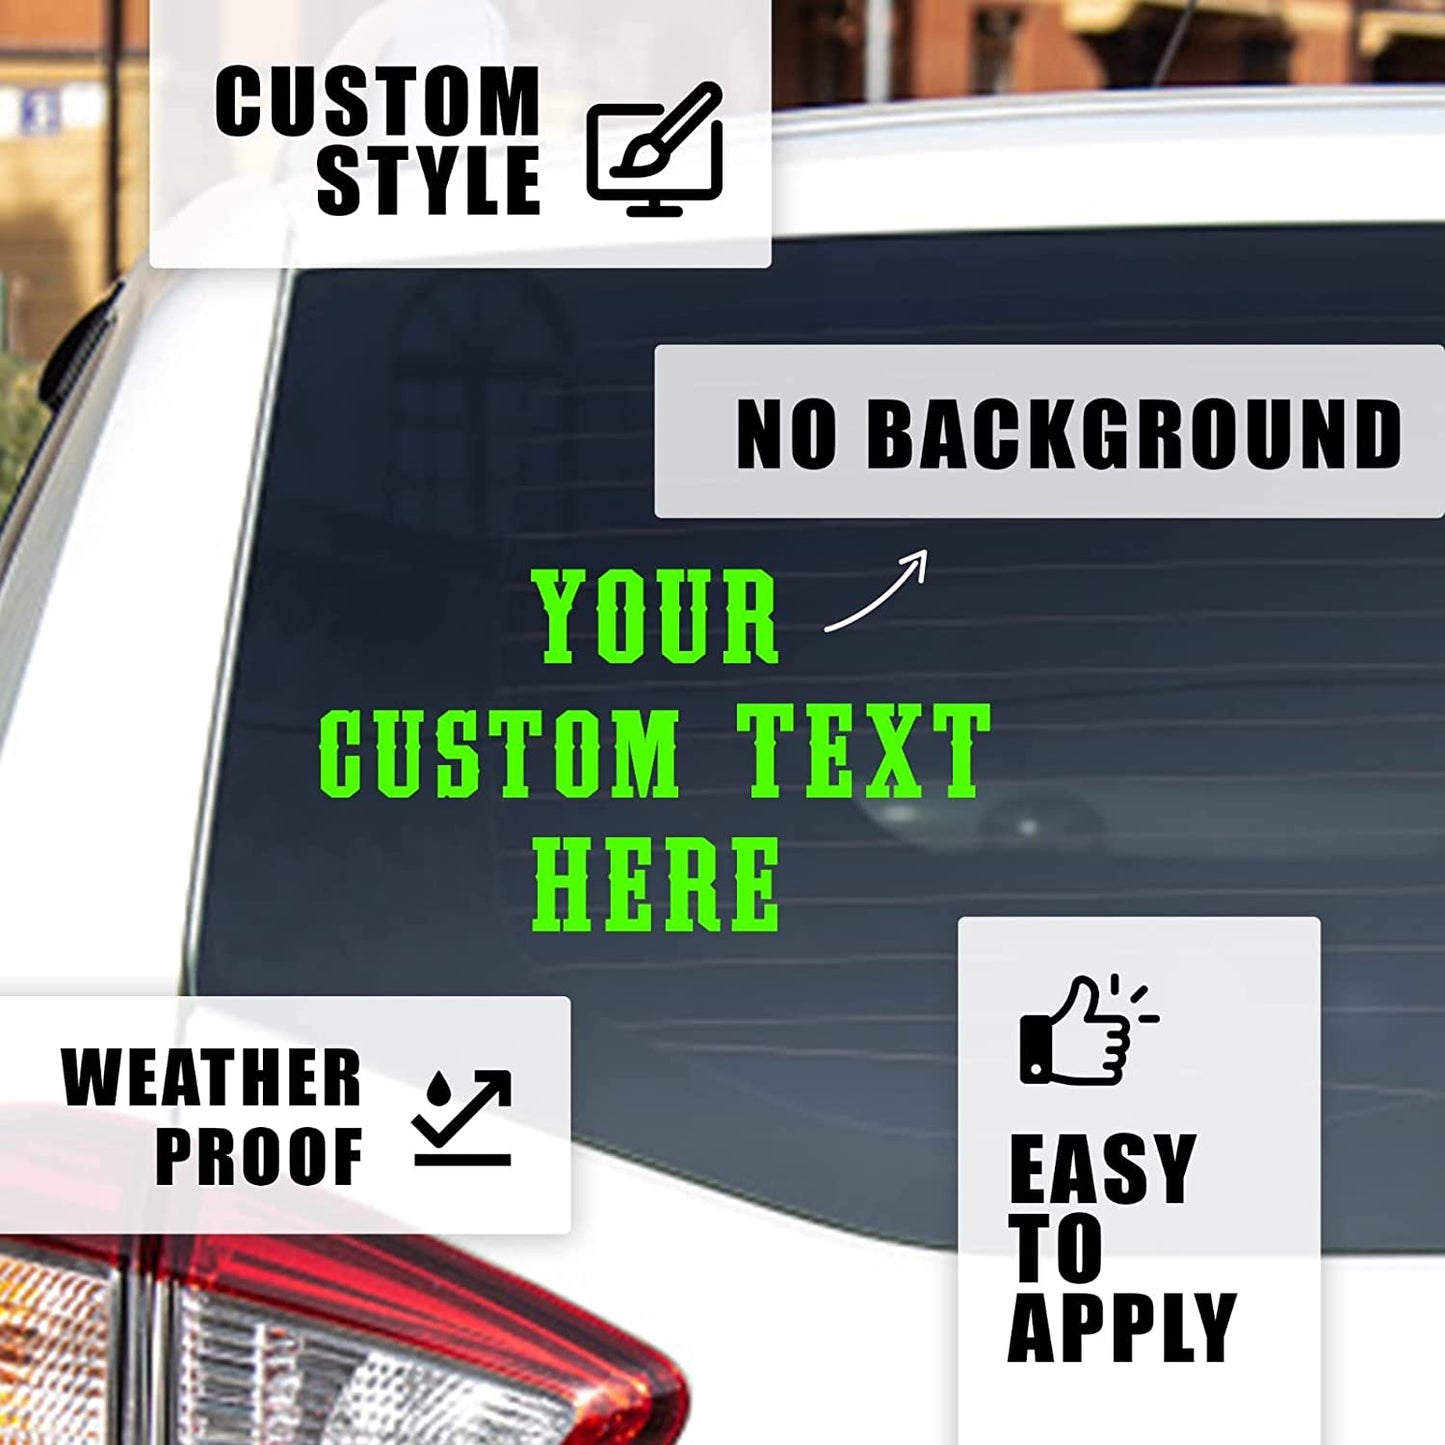 Custom Vinyl Lettering Decal | Make Your Own Car Sticker Decal Personalized Text - Waterproof and Easy to Apply on Semi, Truck, Car, Boat, Window, Windshield, Door, Business or Bumper | 30 Fonts & 11 Colors (4 inch High Lettering)